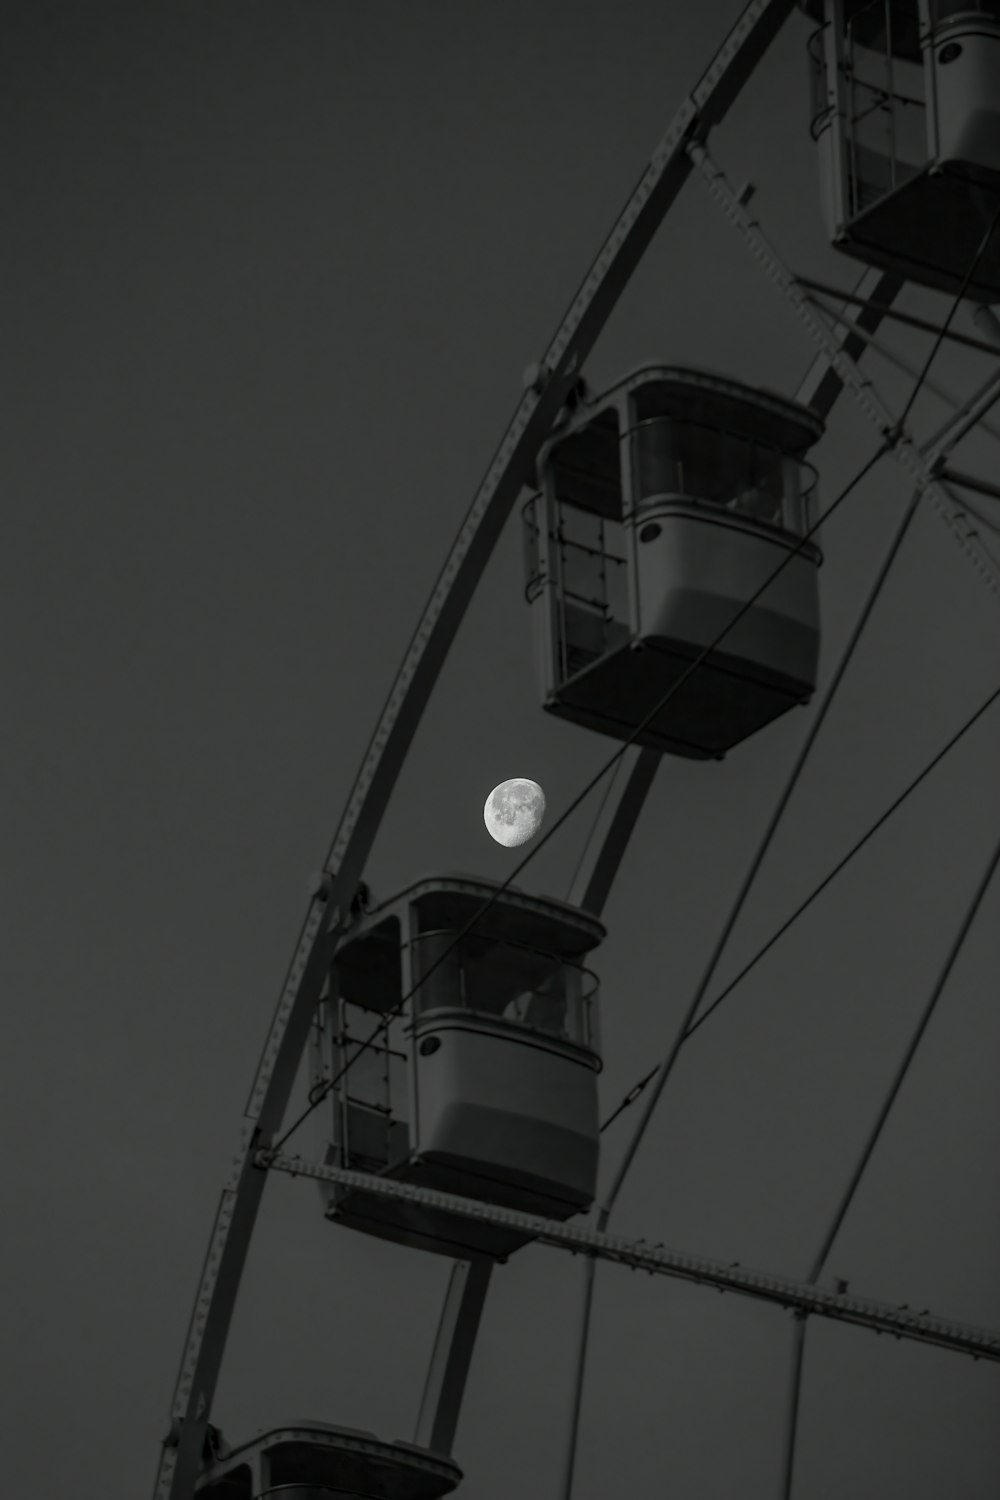 a ferris wheel with a full moon in the background